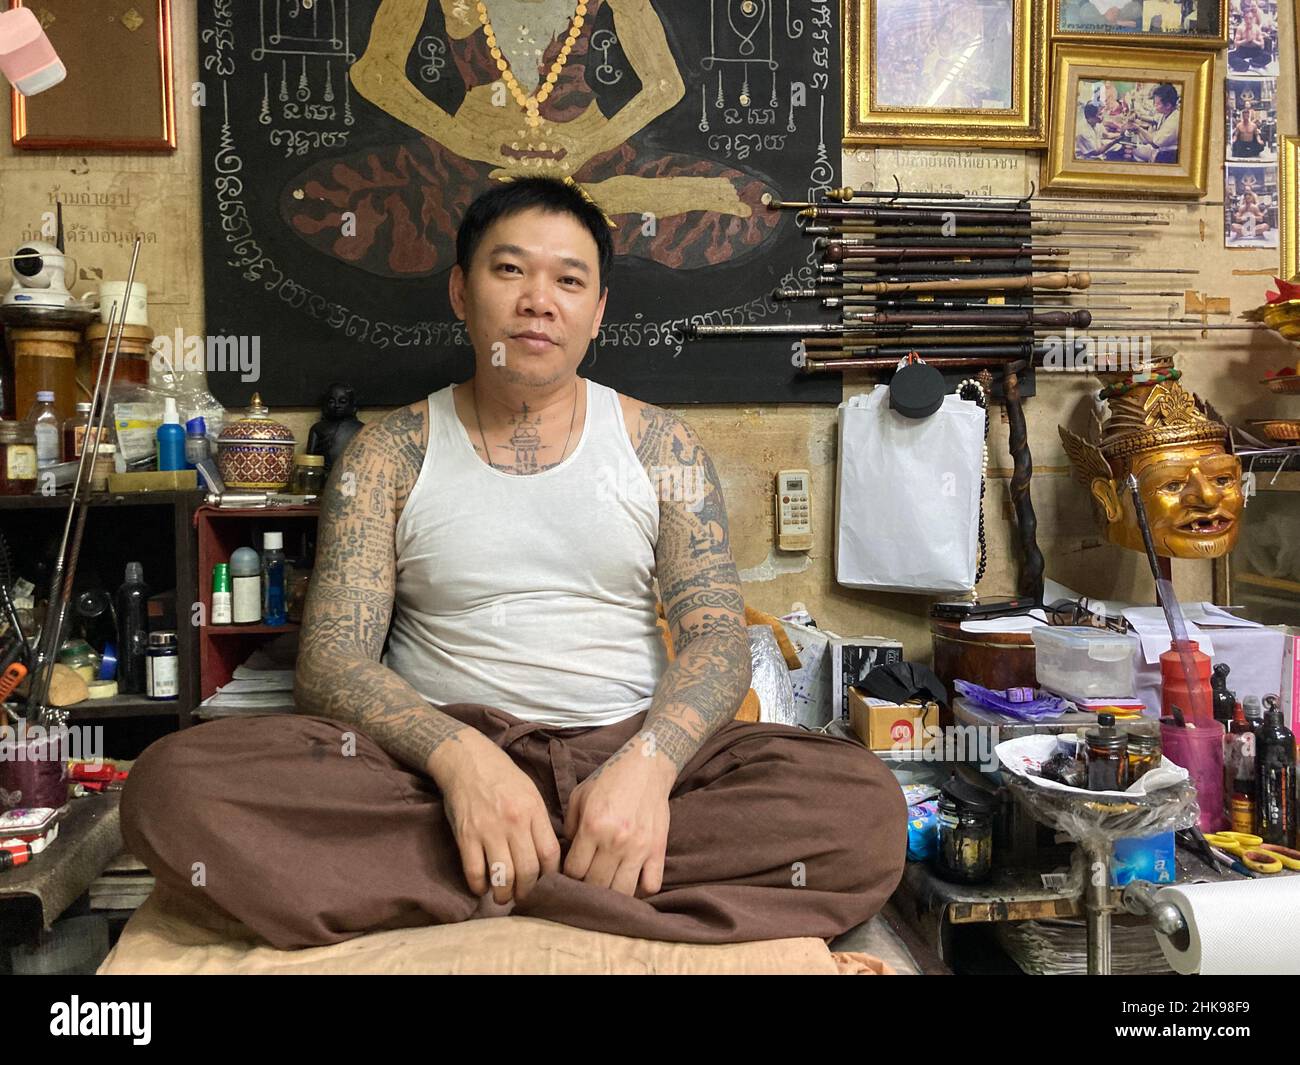 Bangkok, Thailand. 17th Jan, 2022. Sak Yant tattoo master Ajarn Neng sits in his store in Bangkok's On Nut district surrounded by tattoo sticks, ink, sculptures and images. His sacred tattoos are